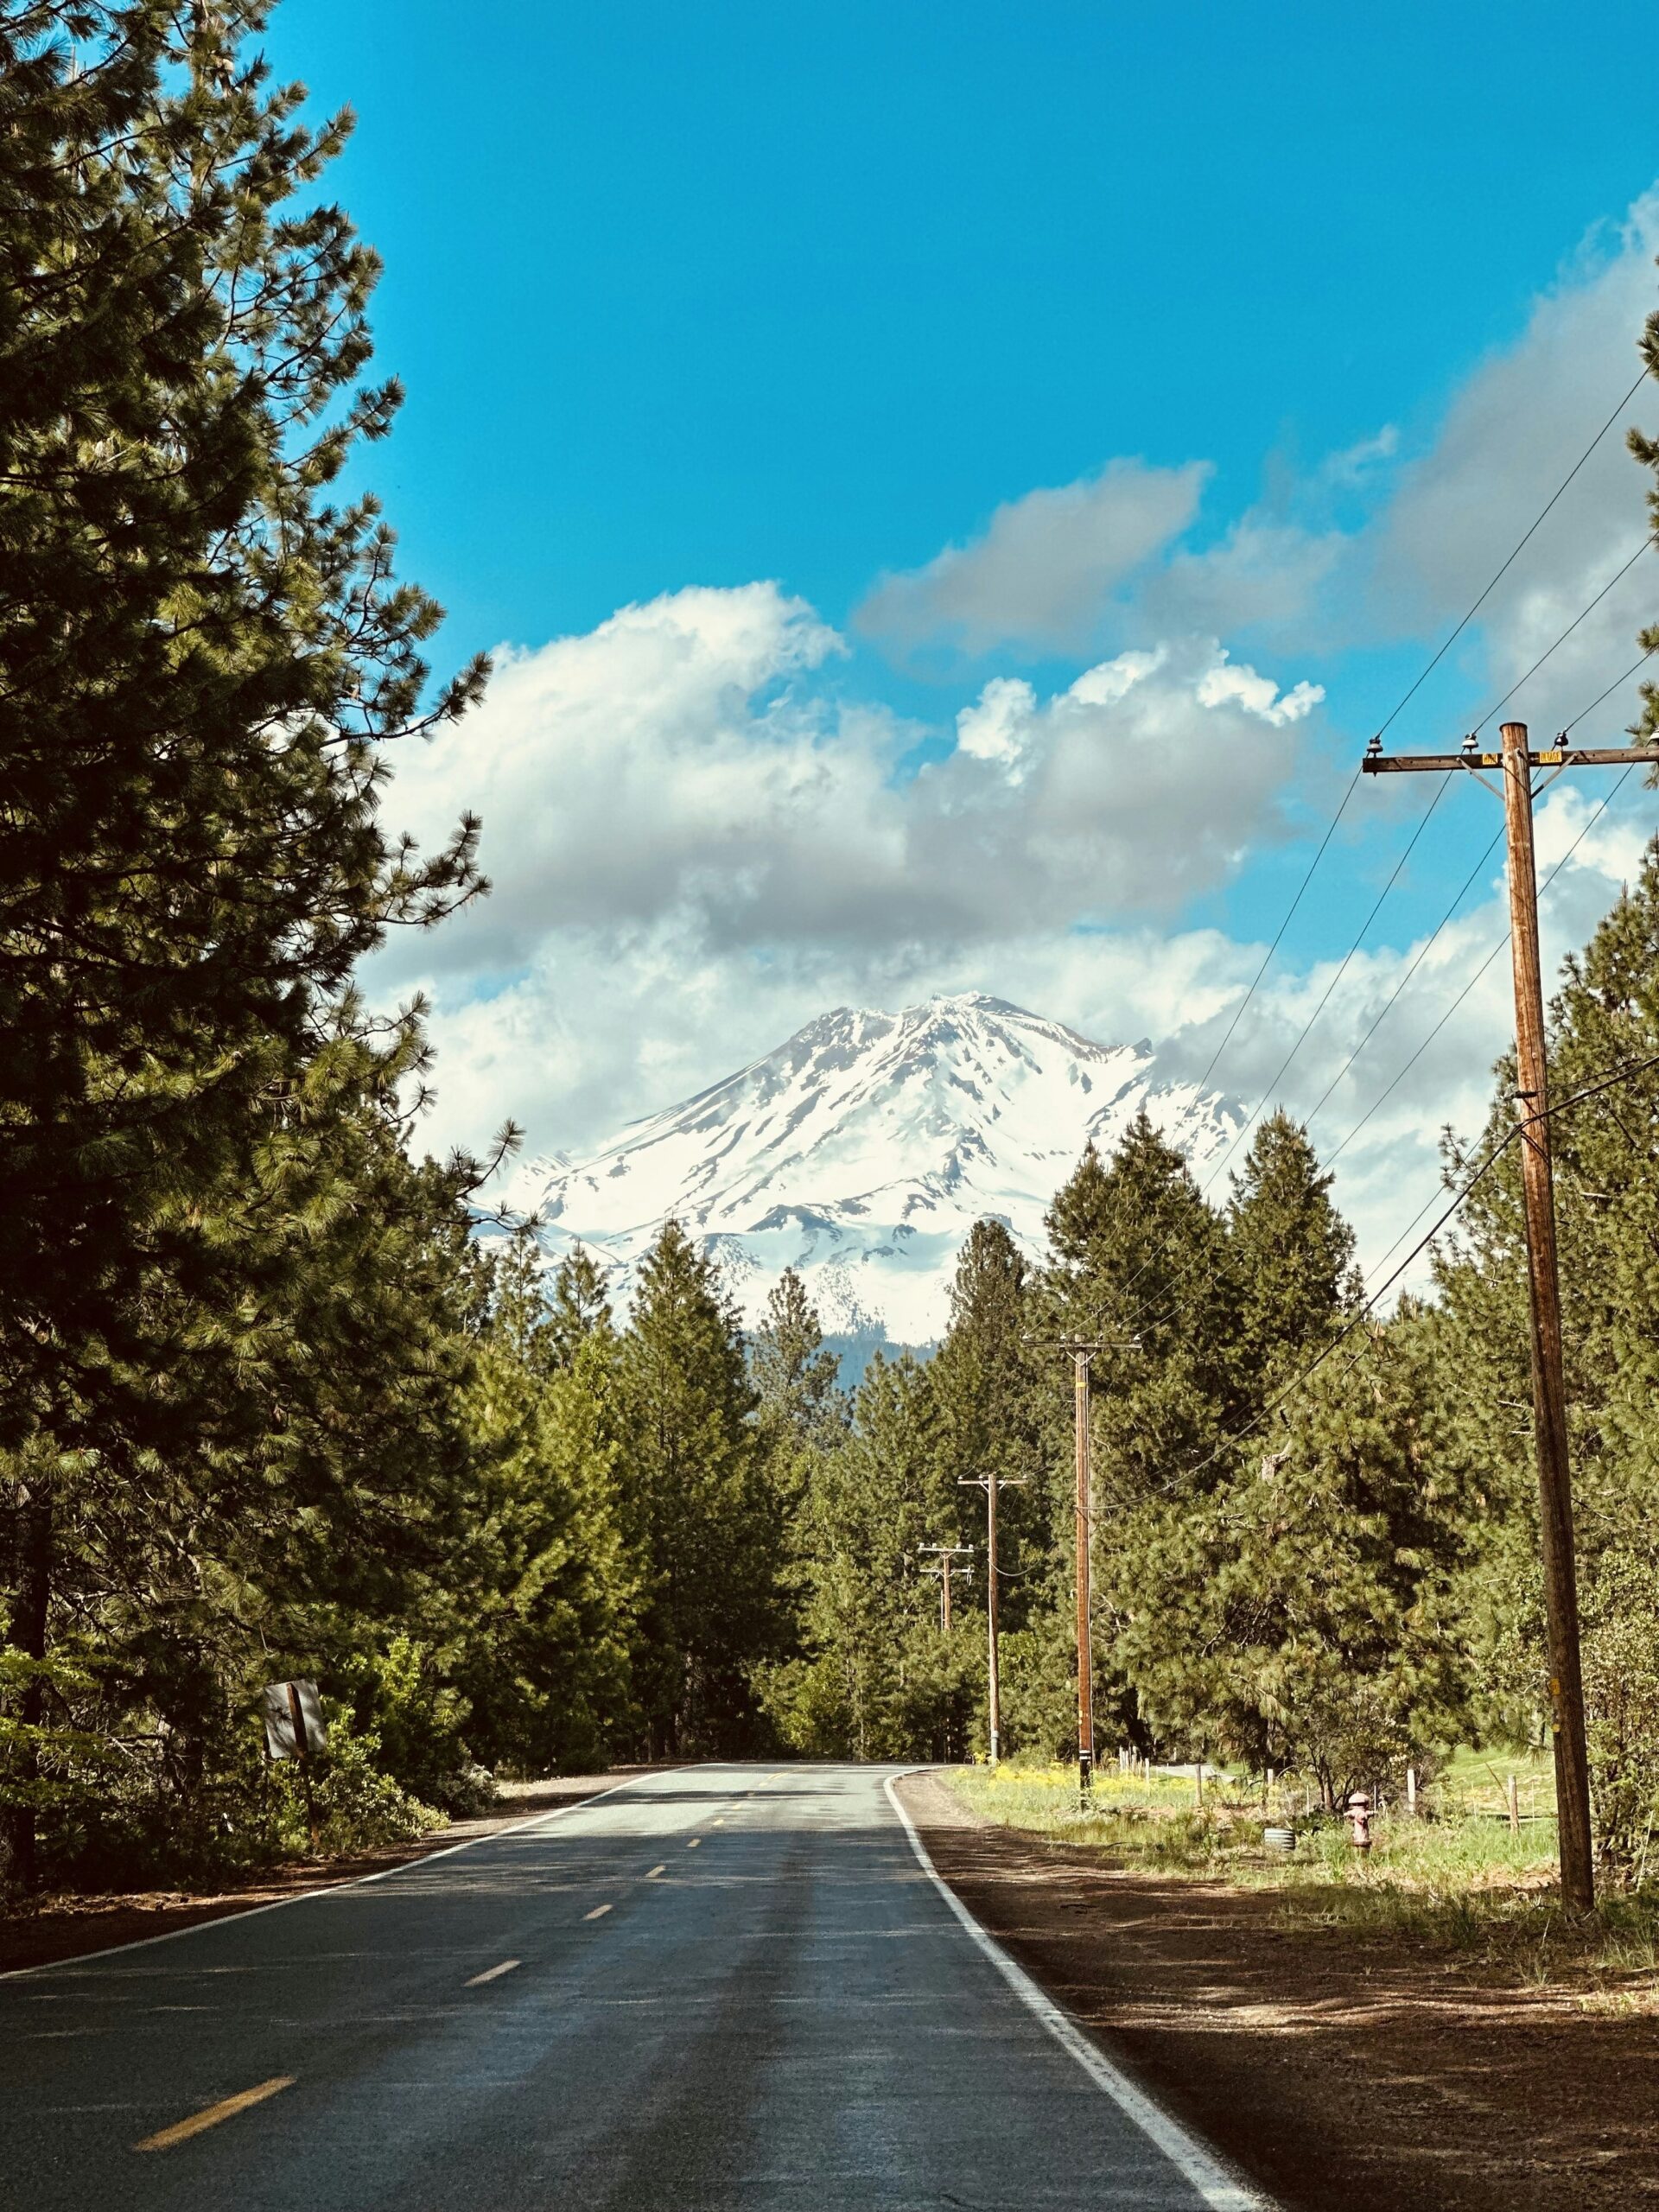 What Are Some Nearby Peaks That Can Be Seen From Mount Shasta?